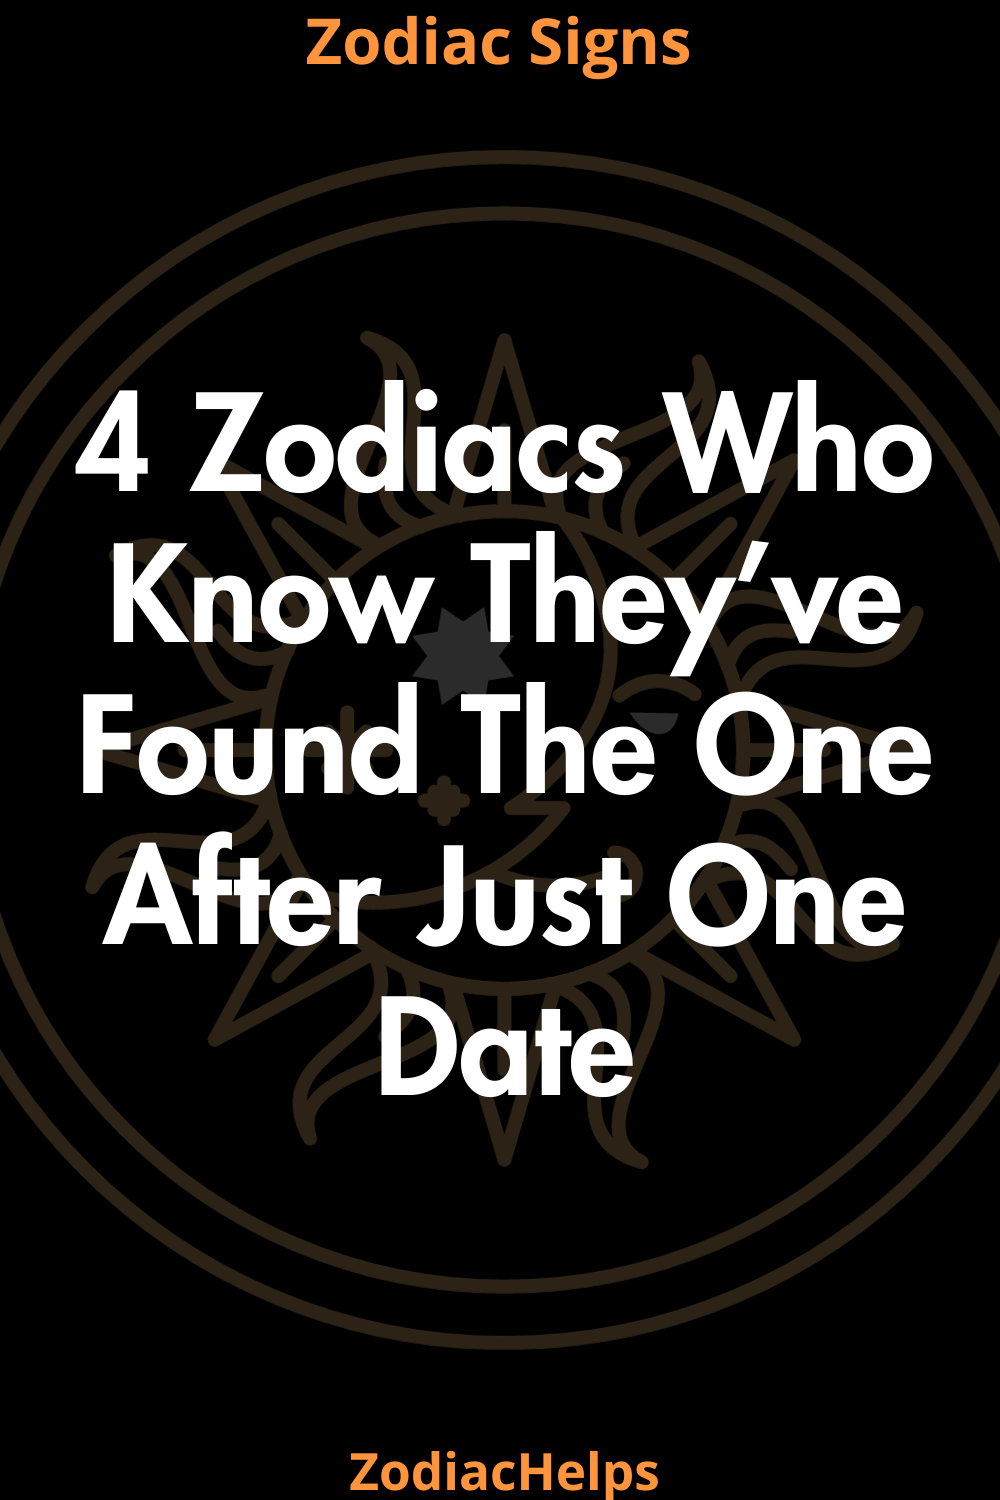 4 Zodiacs Who Know They’ve Found The One After Just One Date